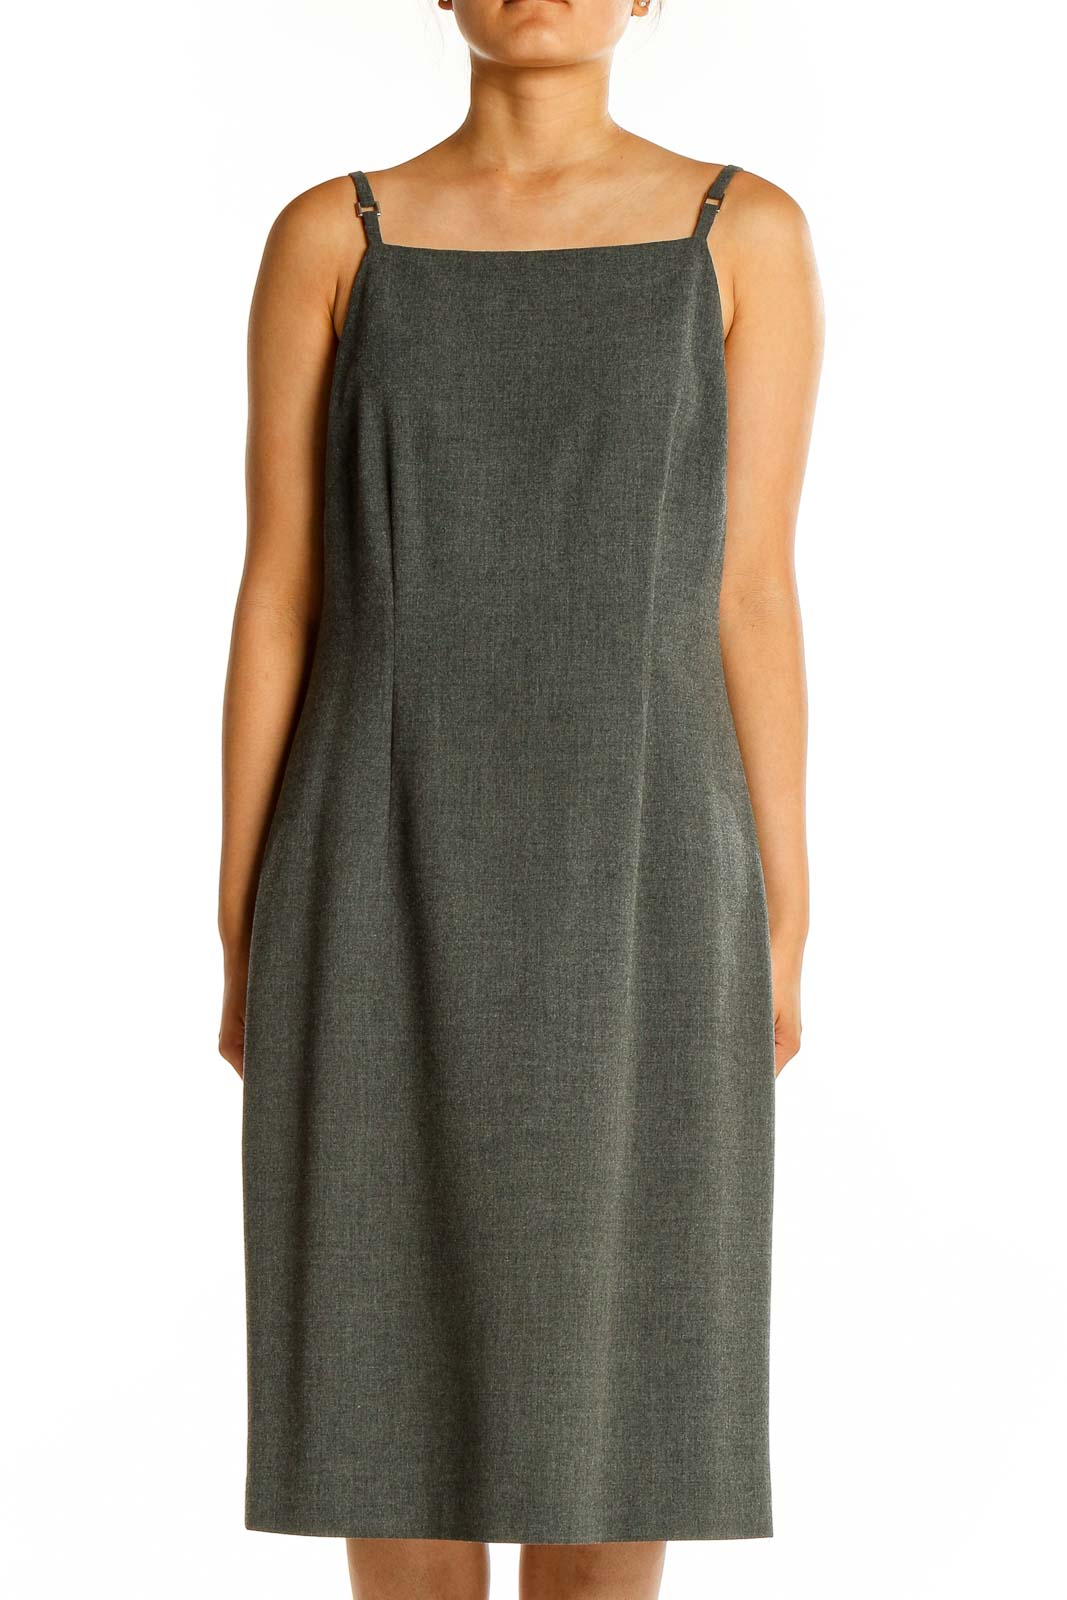 Gray Solid Slip Dress Front